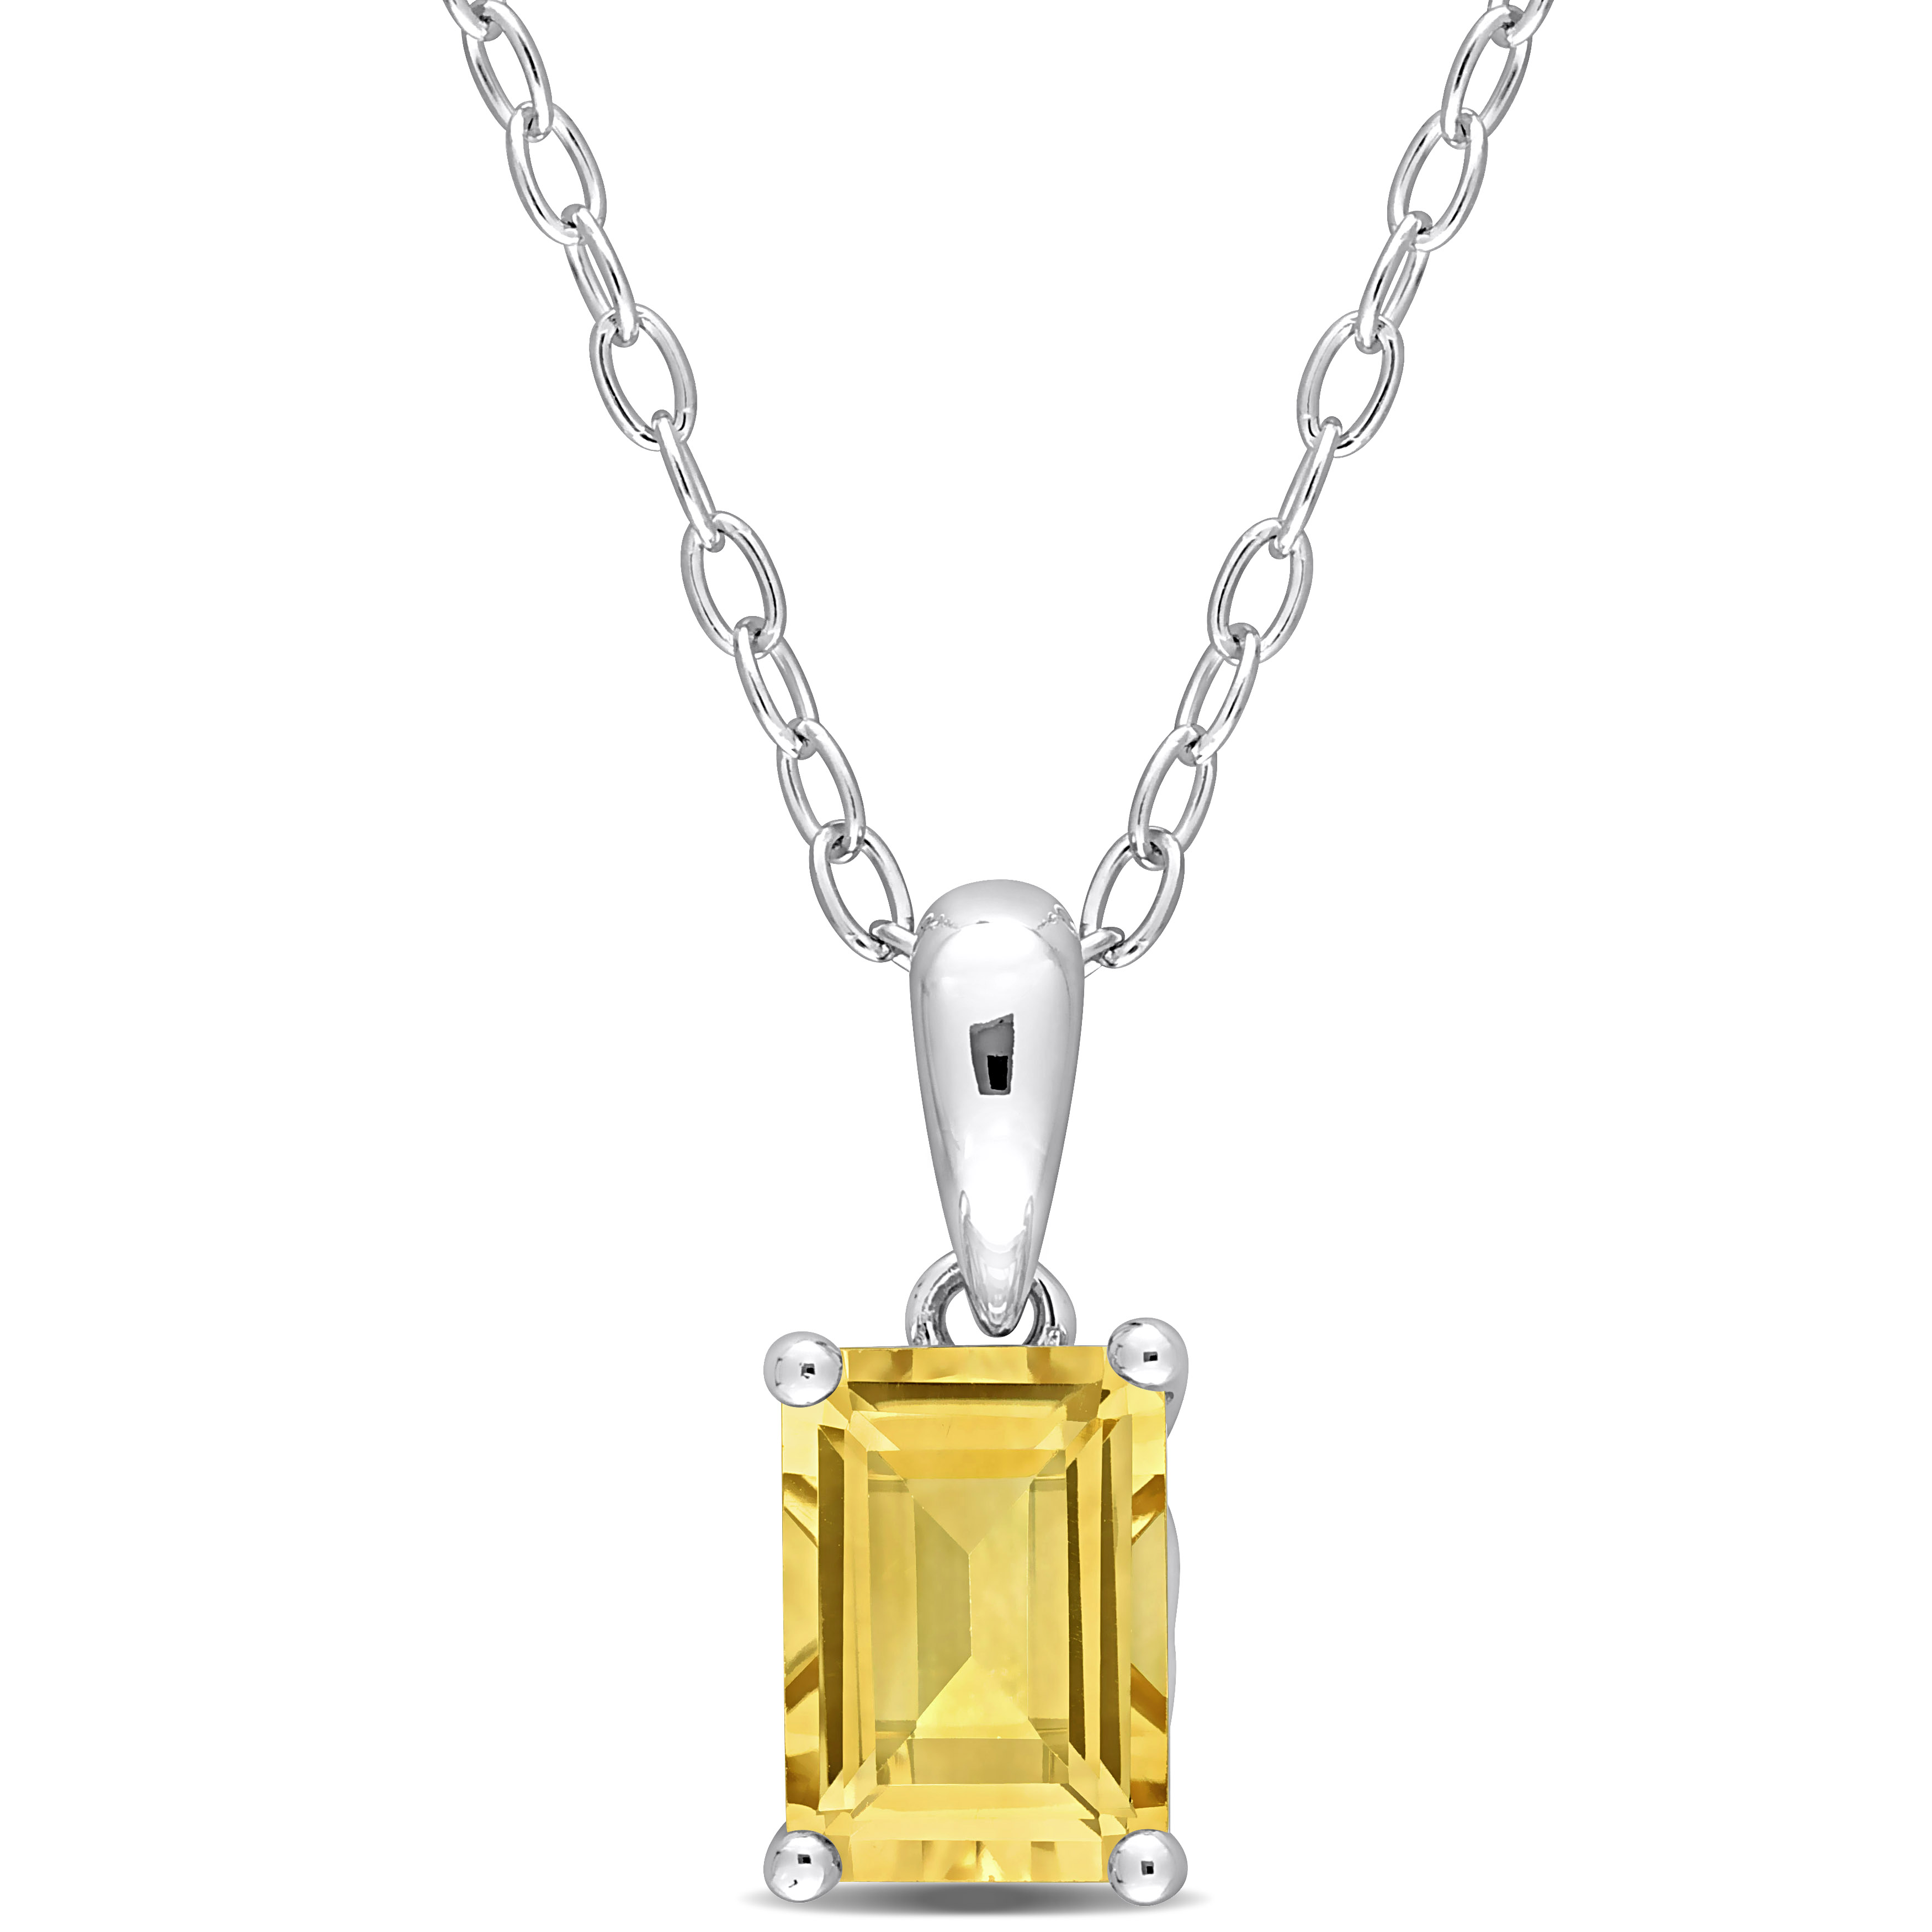 1 1/8 CT TGW Emerald Cut Citrine Solitaire Heart Design Pendant with Chain in Sterling Silver - 18 in.